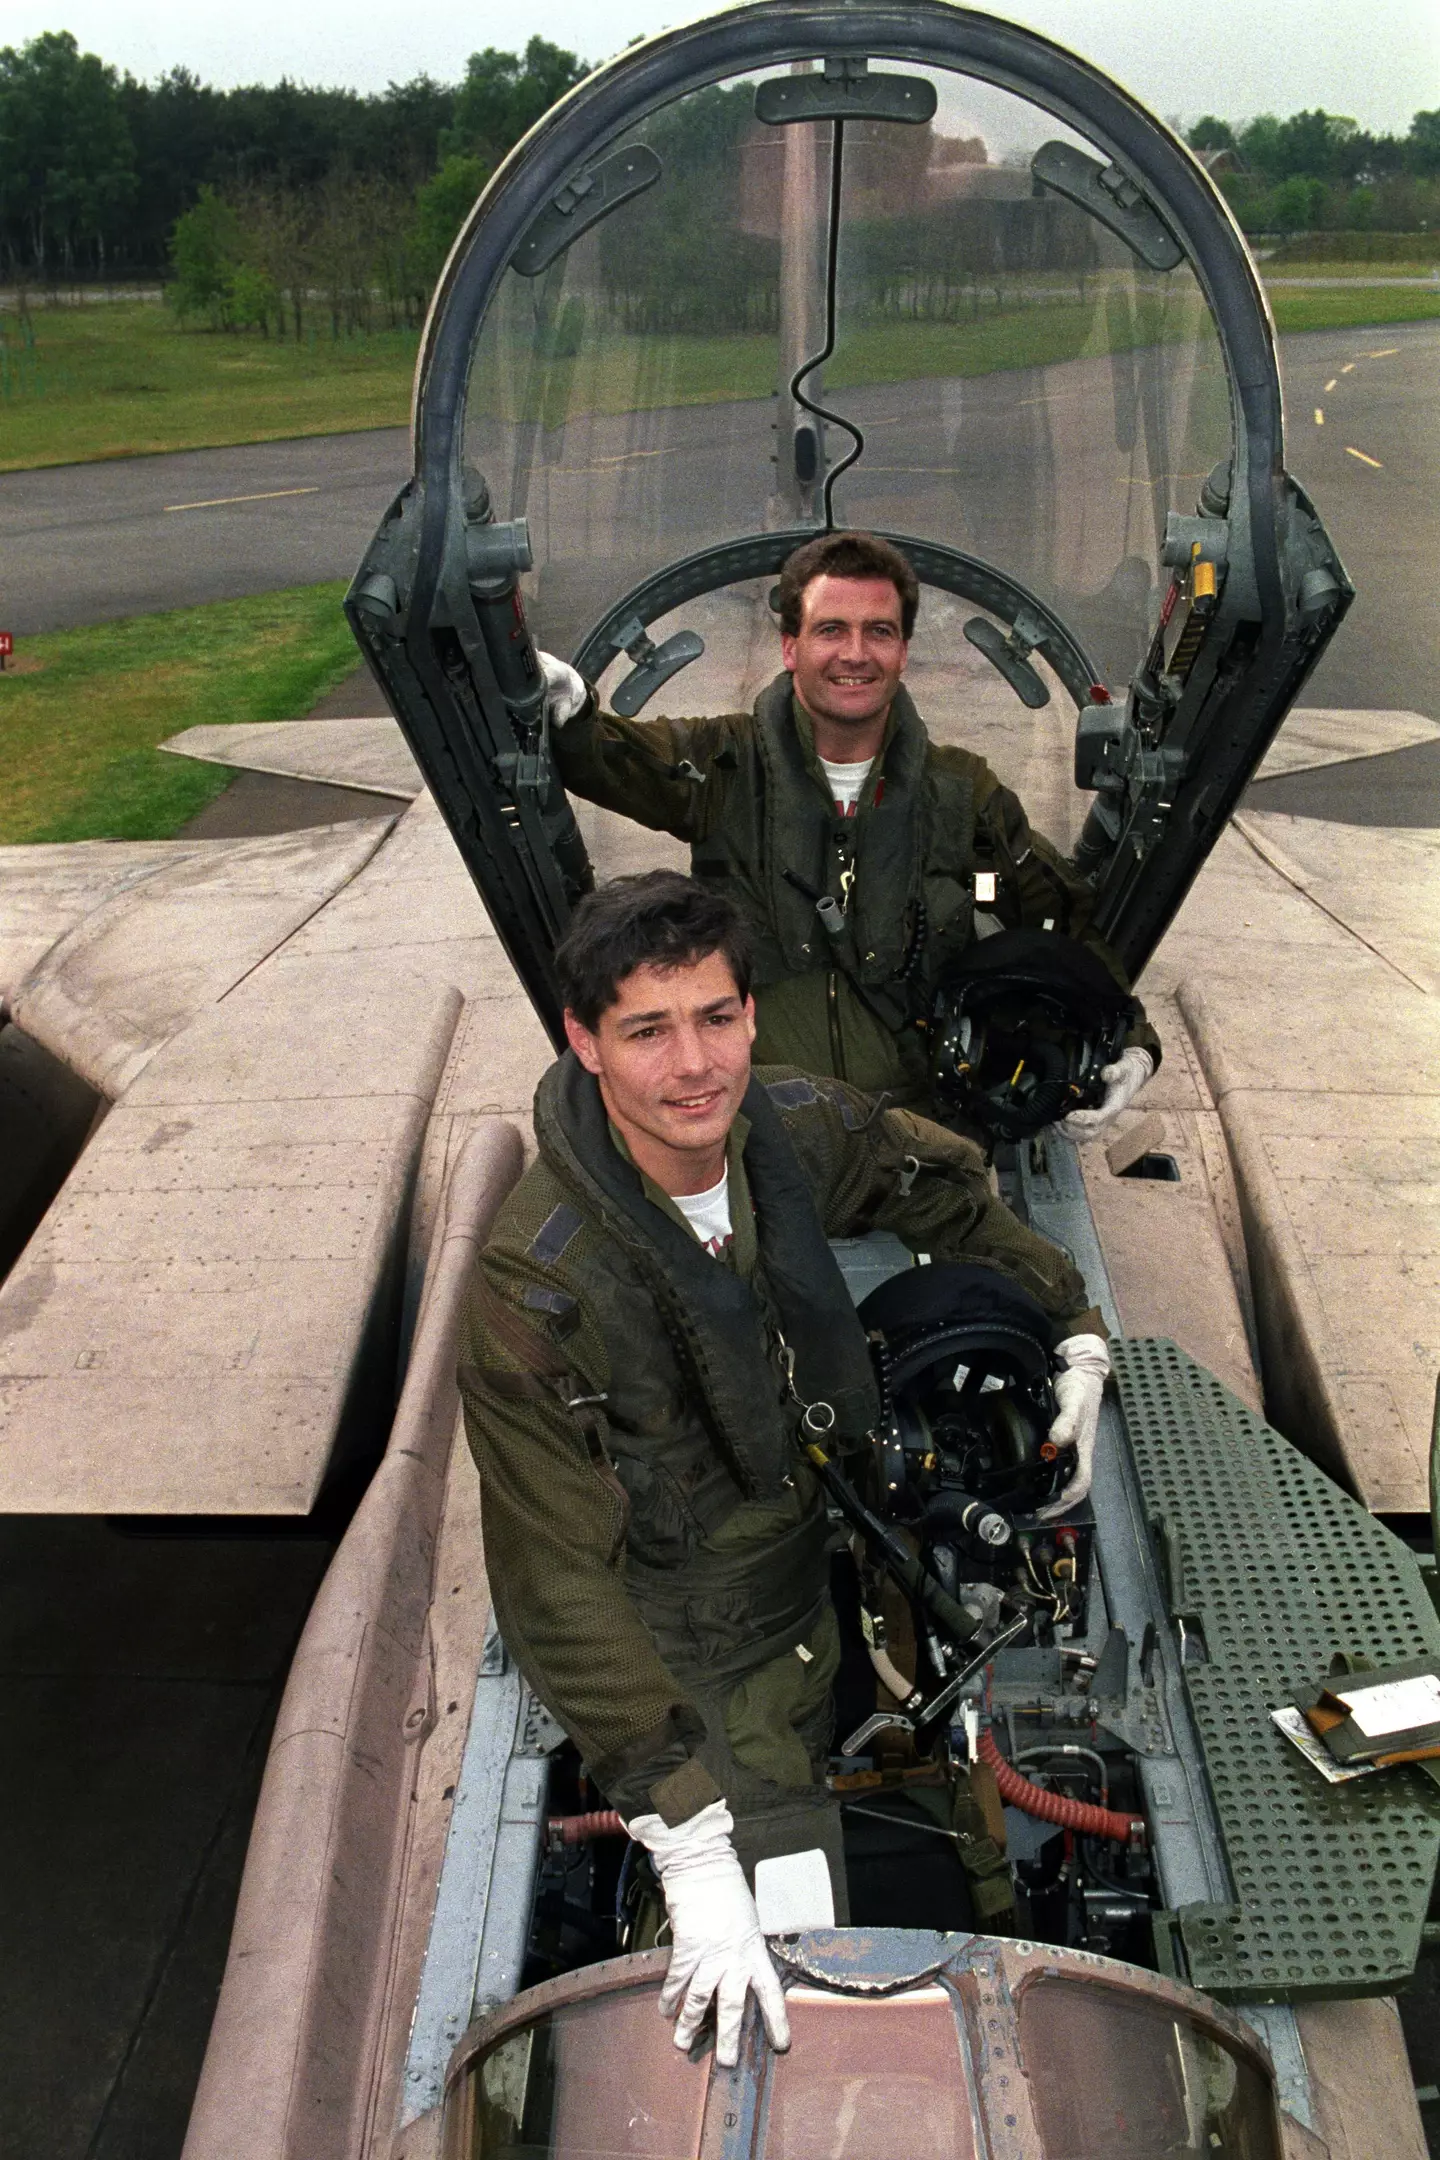 John Nichol and John Peters after completing their first flight together since being shot down.